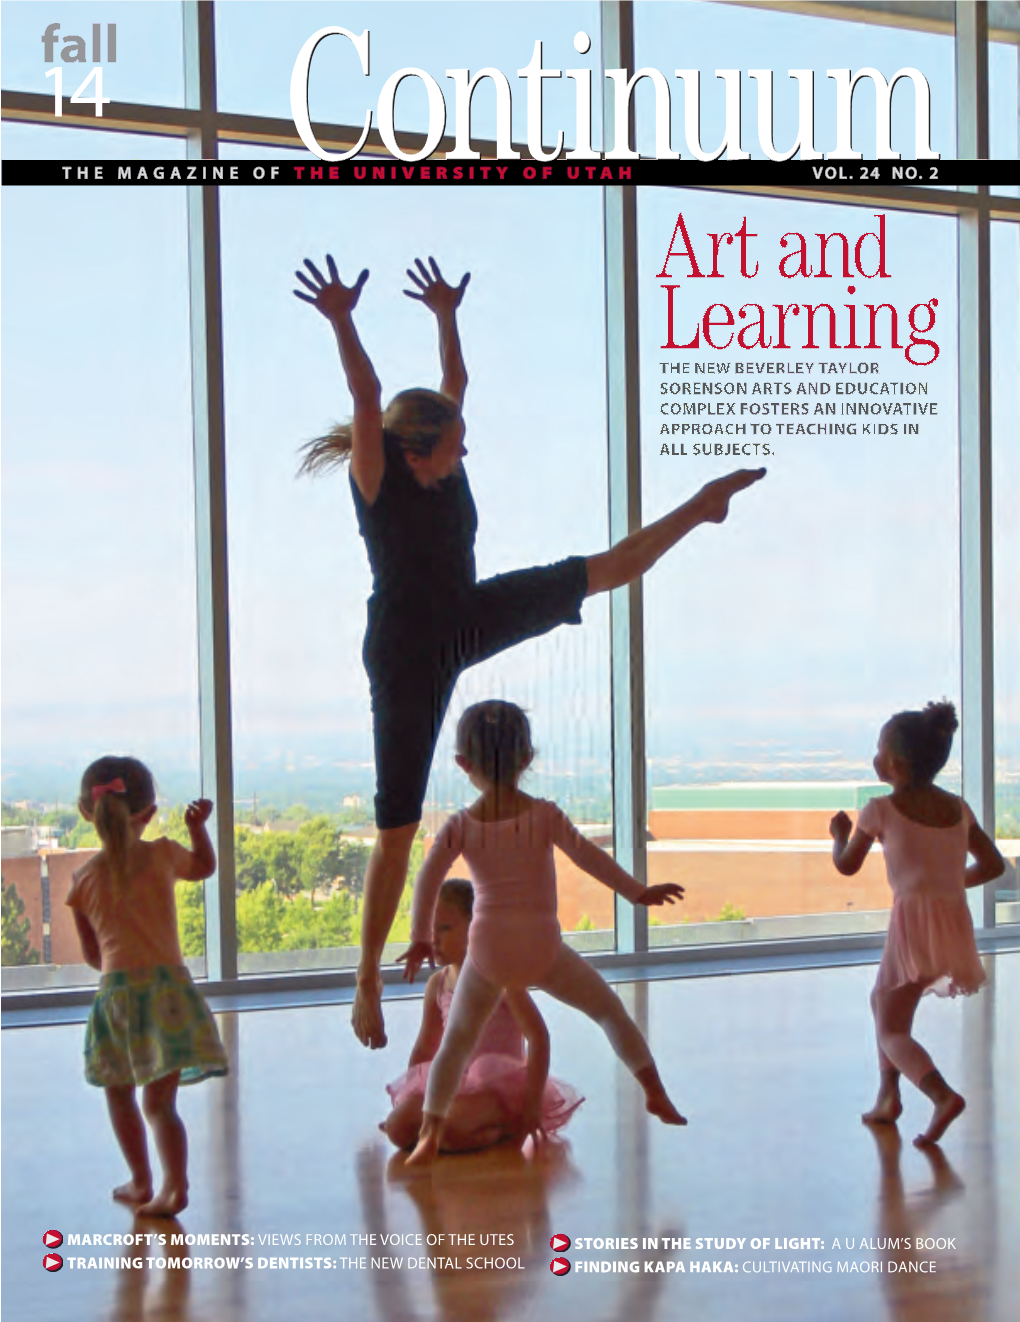 Art and Learning the NEW BEVERLEY TAYLOR SORENSON ARTS and EDUCATION COMPLEX FOSTERS an INNOVATIVE APPROACH to TEACHING KIDS in ALL SUBJECTS